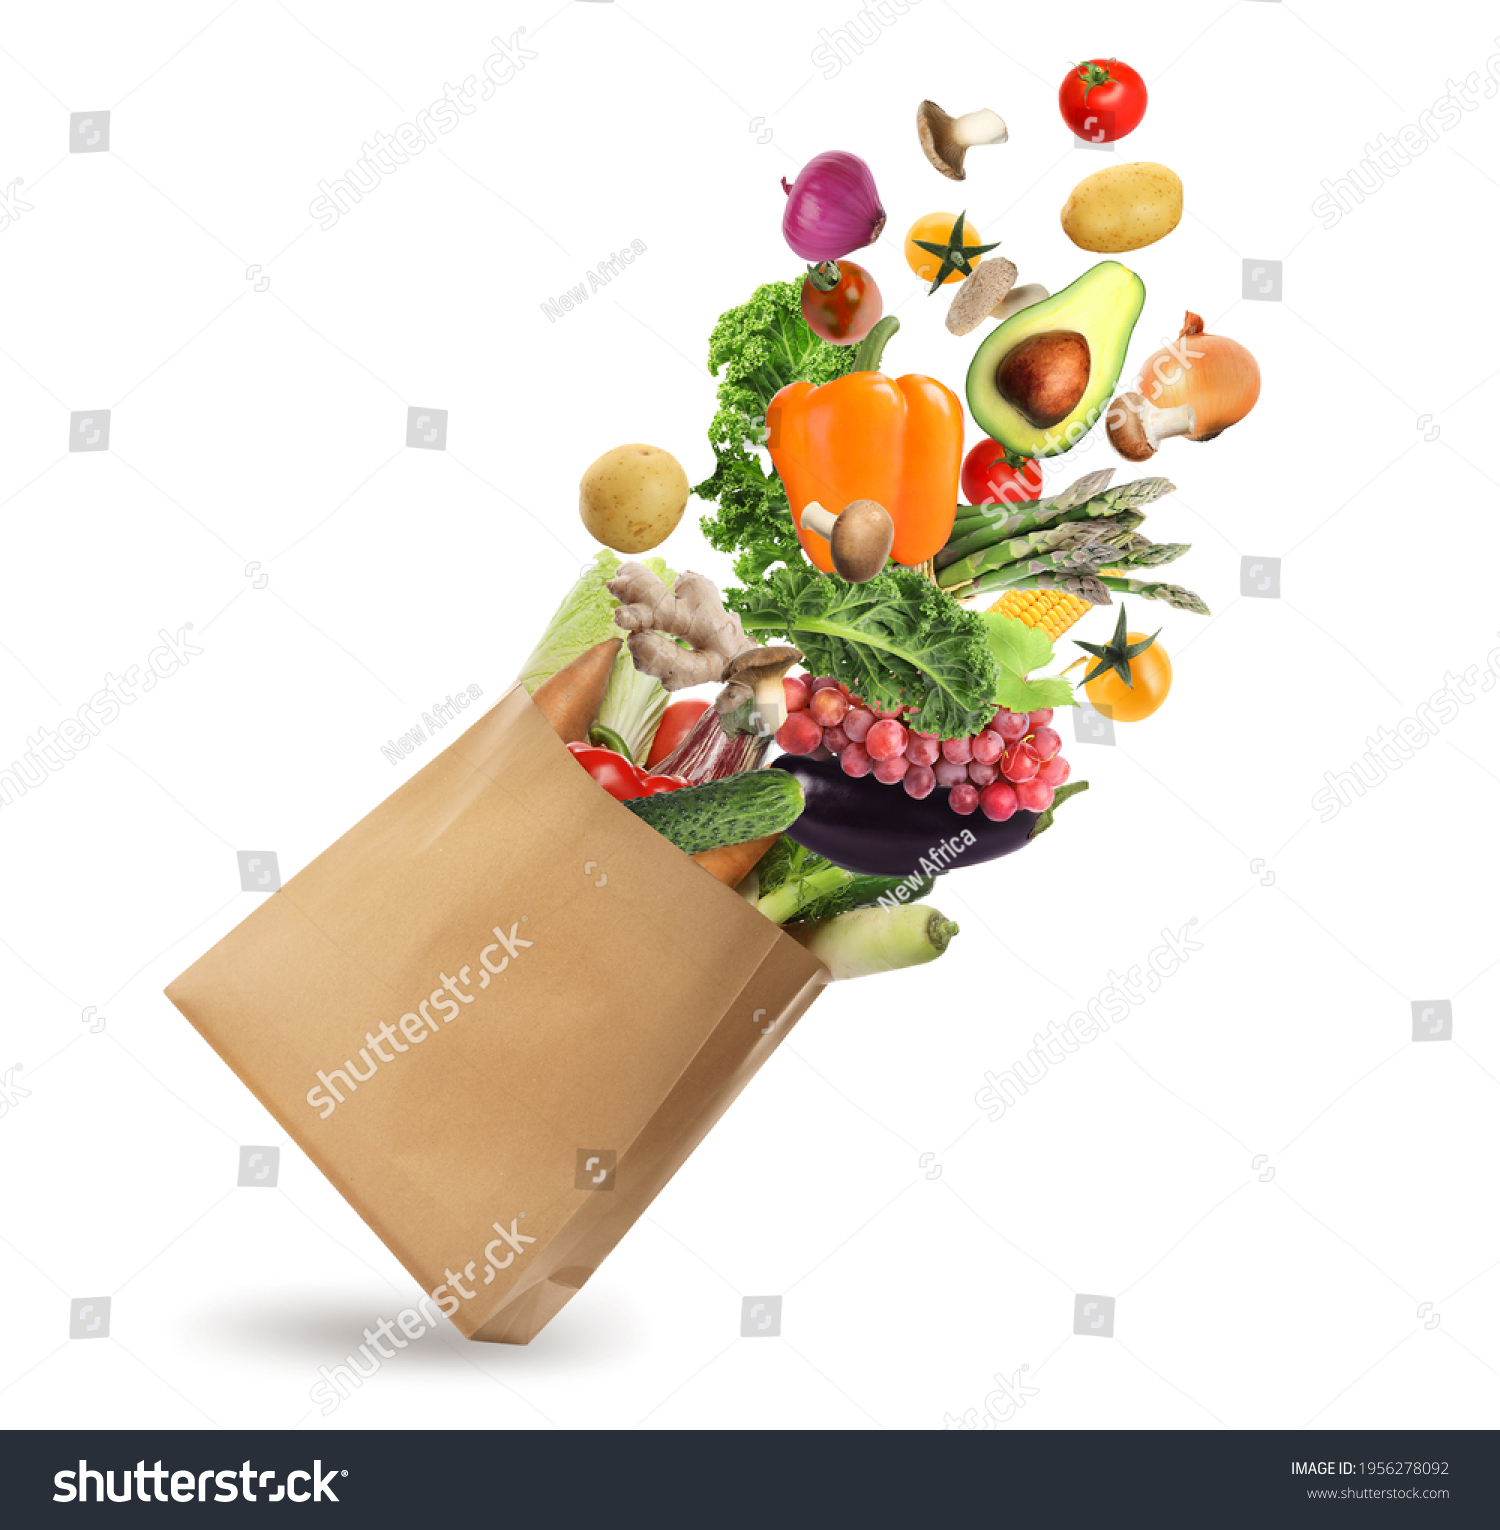 Paper bag with vegetables and fruits on white background. Vegetarian food  #1956278092